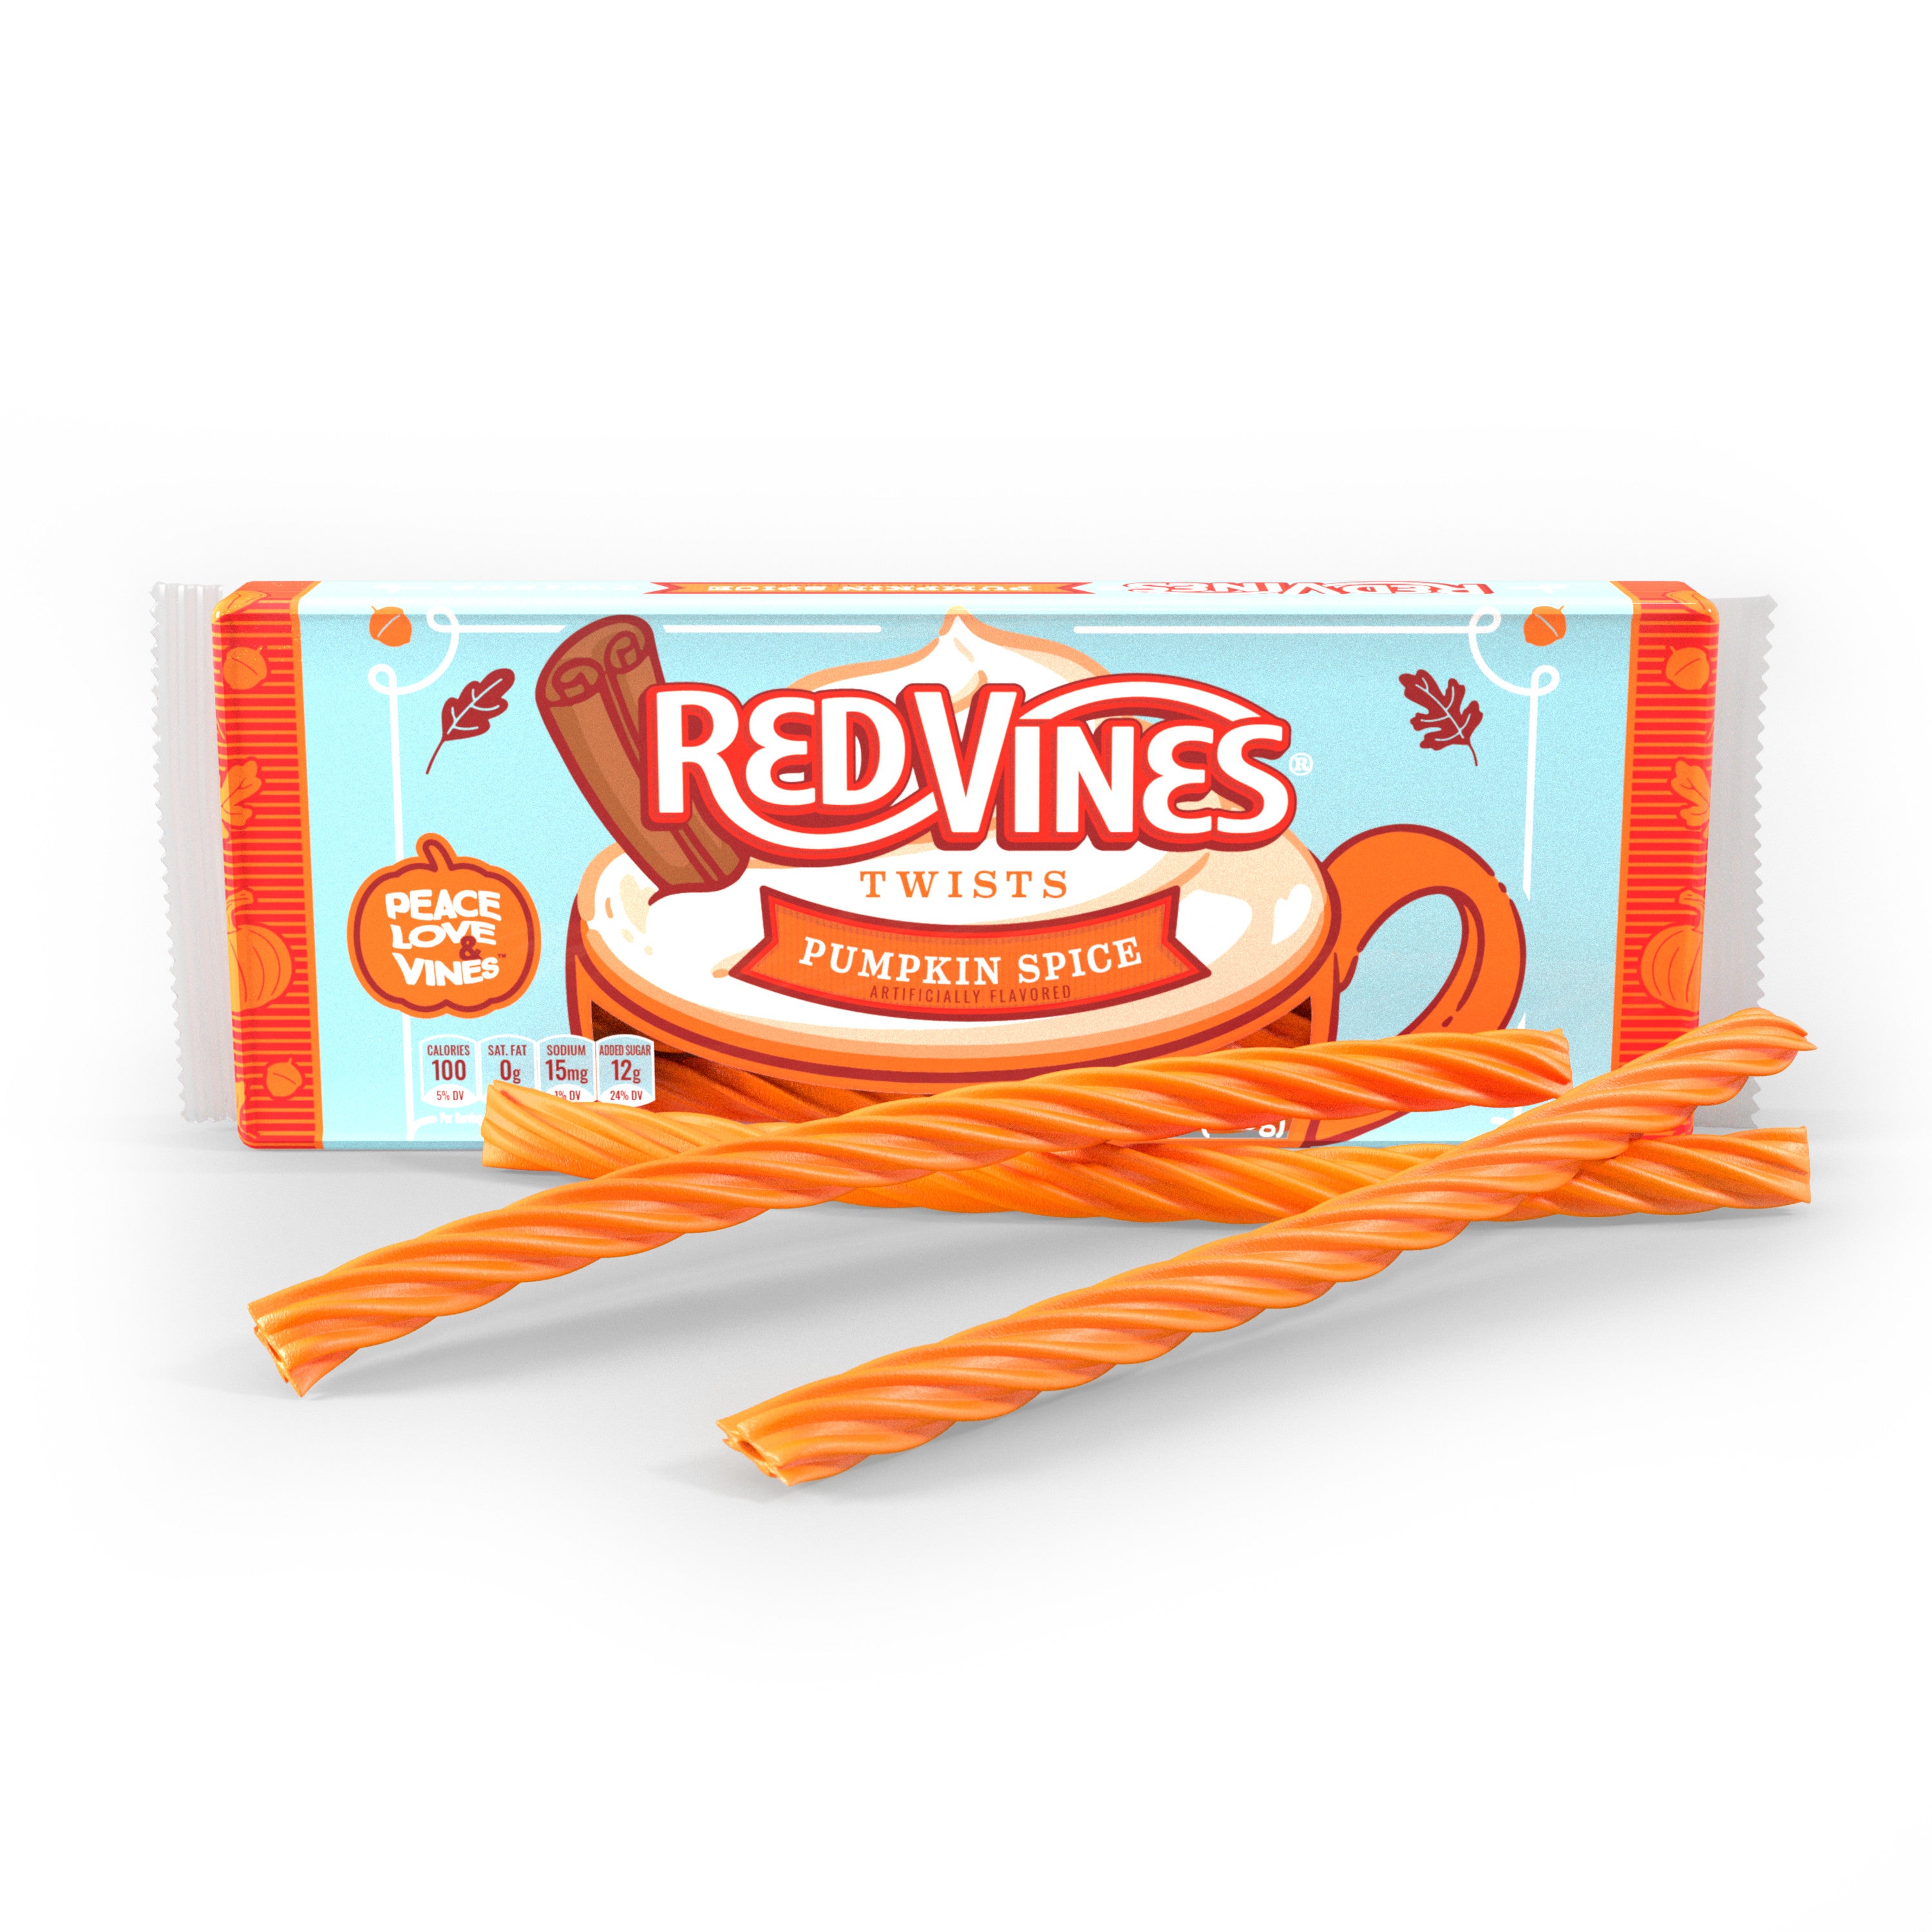 RED VINES Pumpkin Spice Halloween Candy Twists - front of 4oz tray with raw candy twists